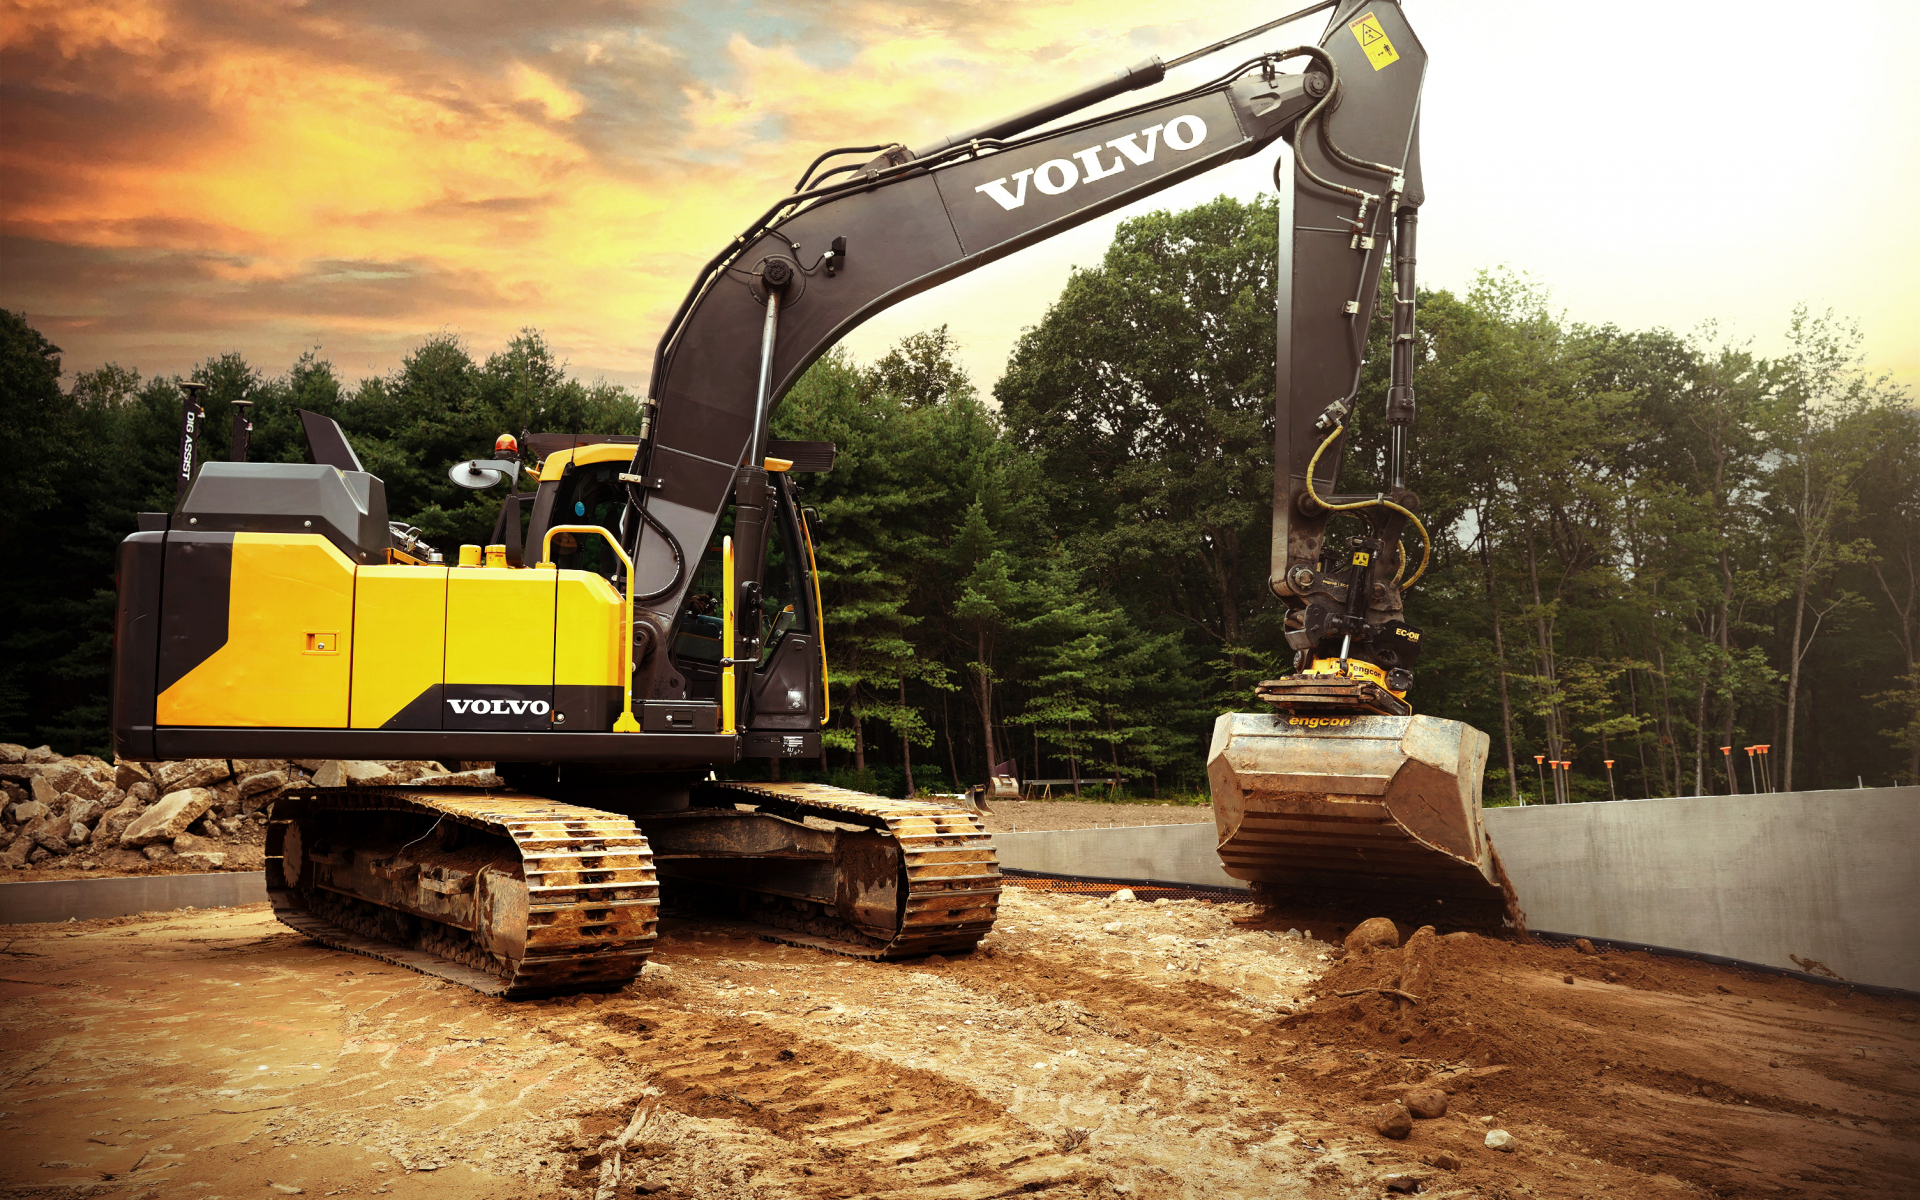 Engcon and Volvo launch a global collaboration – the start of a long-term joint development in the industry